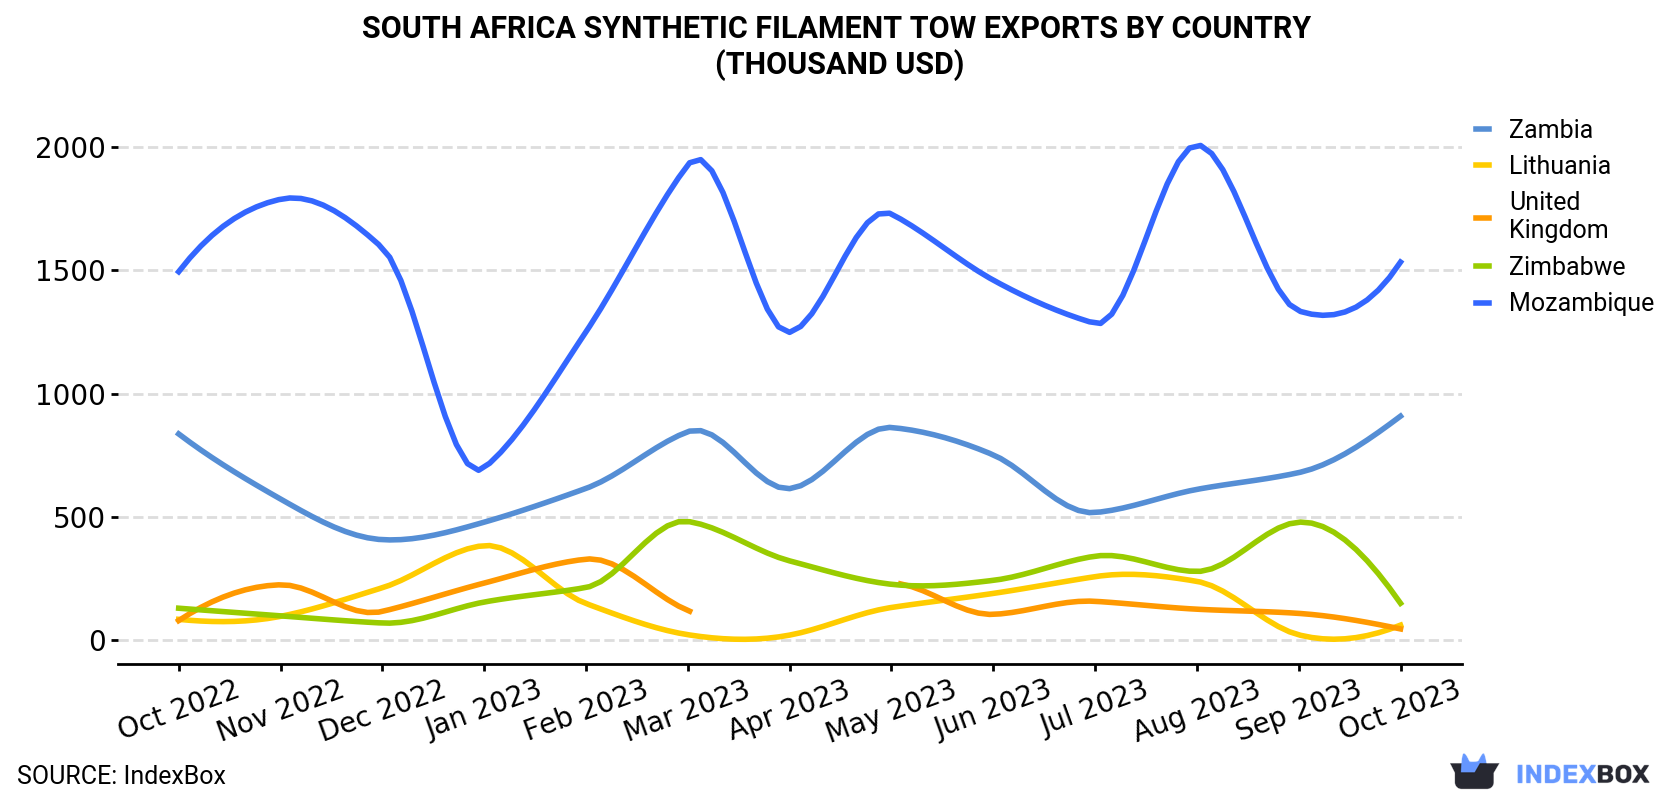 South Africa Synthetic Filament Tow Exports By Country (Thousand USD)